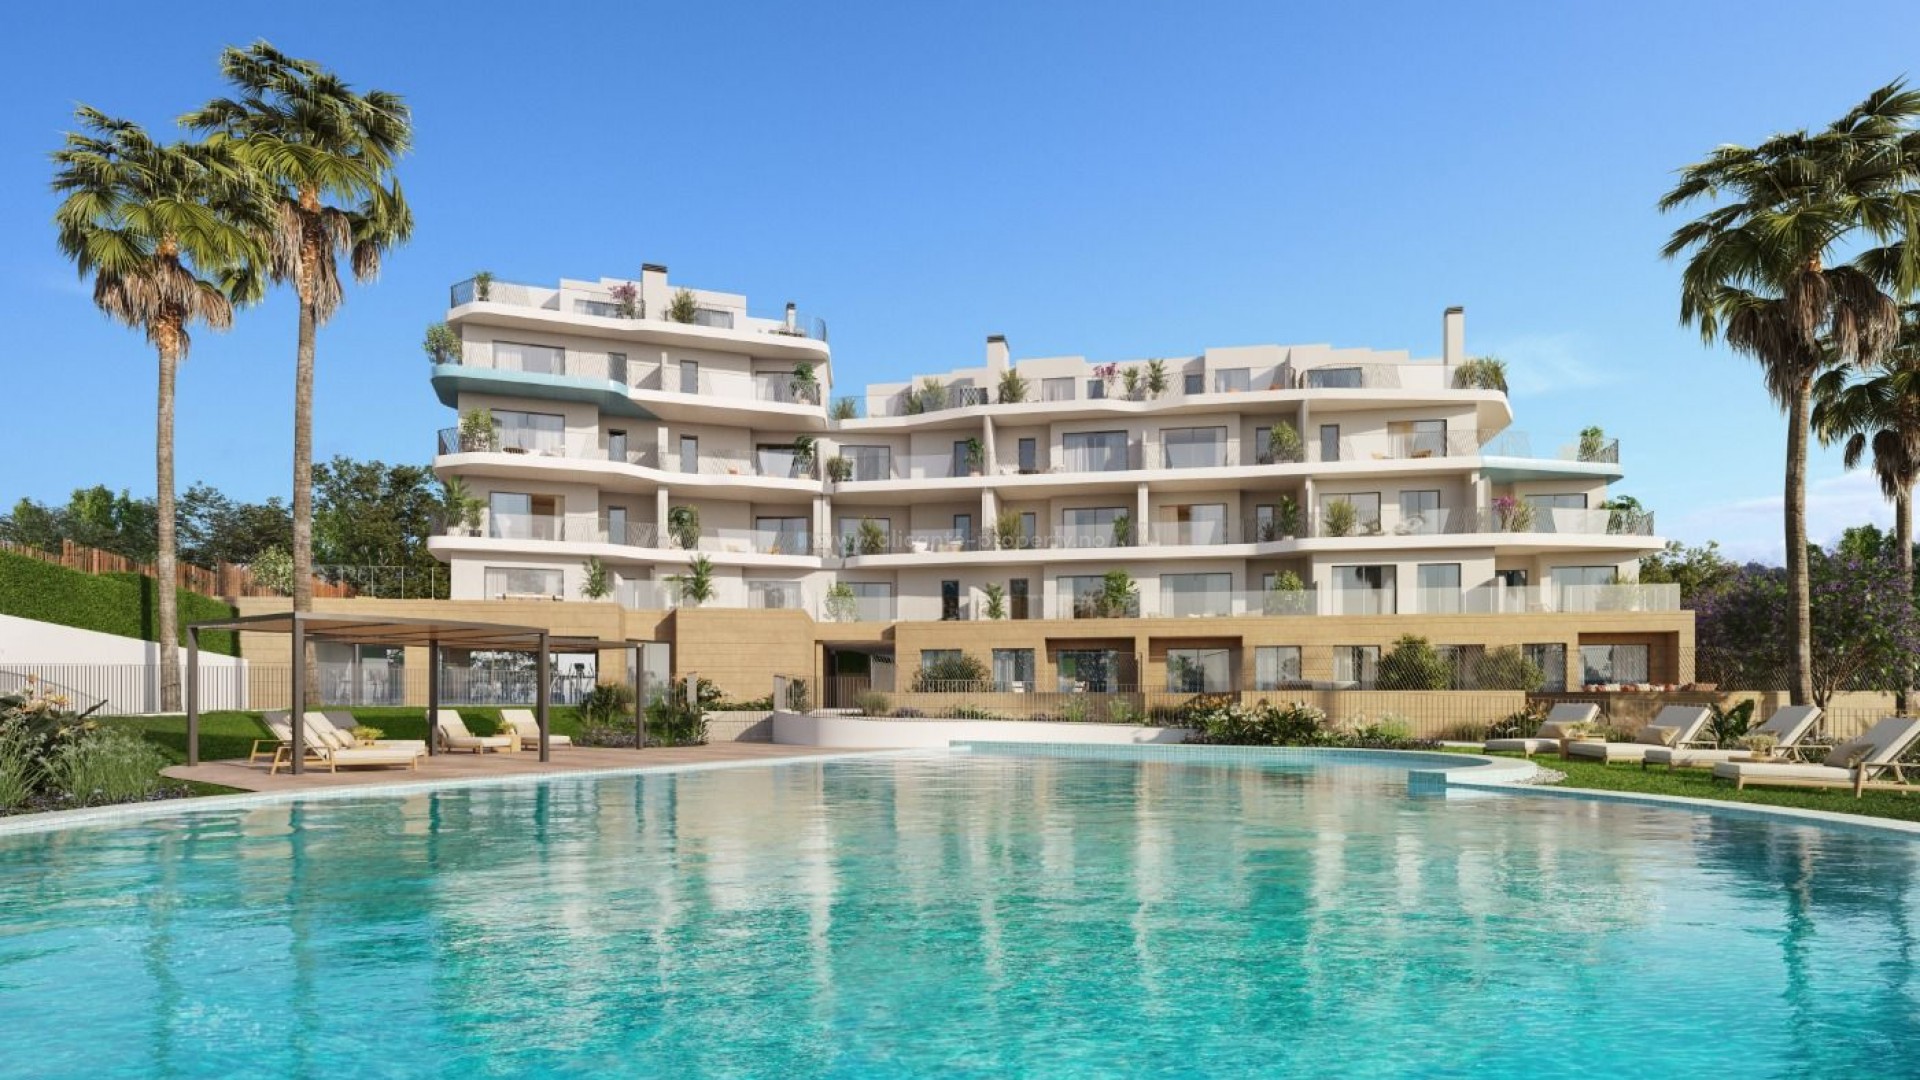 25 luxury apartments in Villajoyosa, just 50 meters from the sea, 2/3 bedrooms, 2 bathrooms, large terraces and great shared pool gym, sauna, steam room